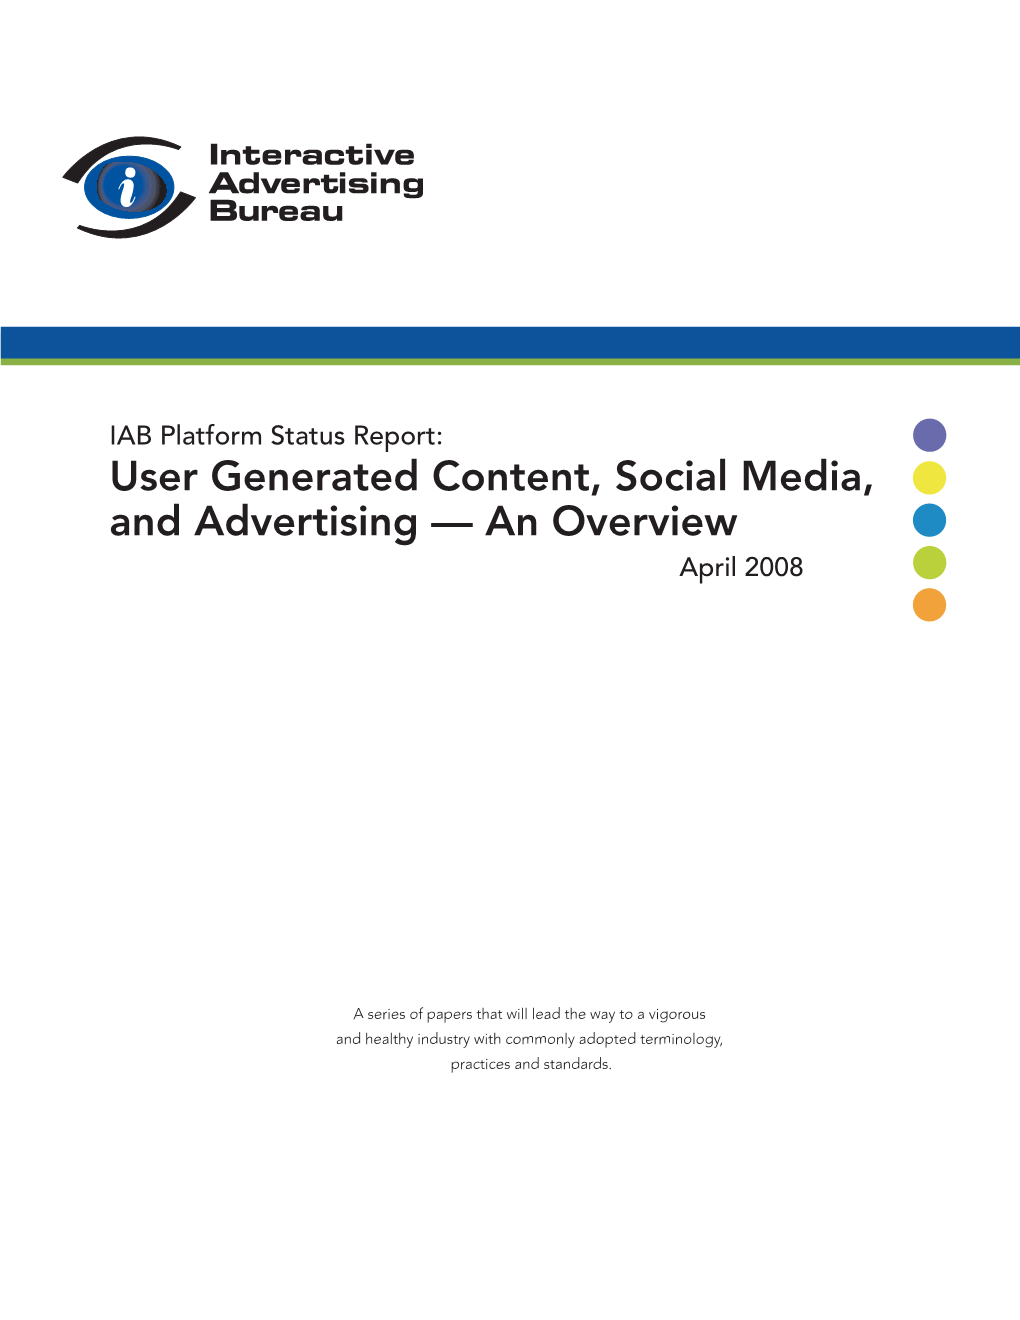 User Generated Content, Social Media, and Advertising — an Overview April 2008